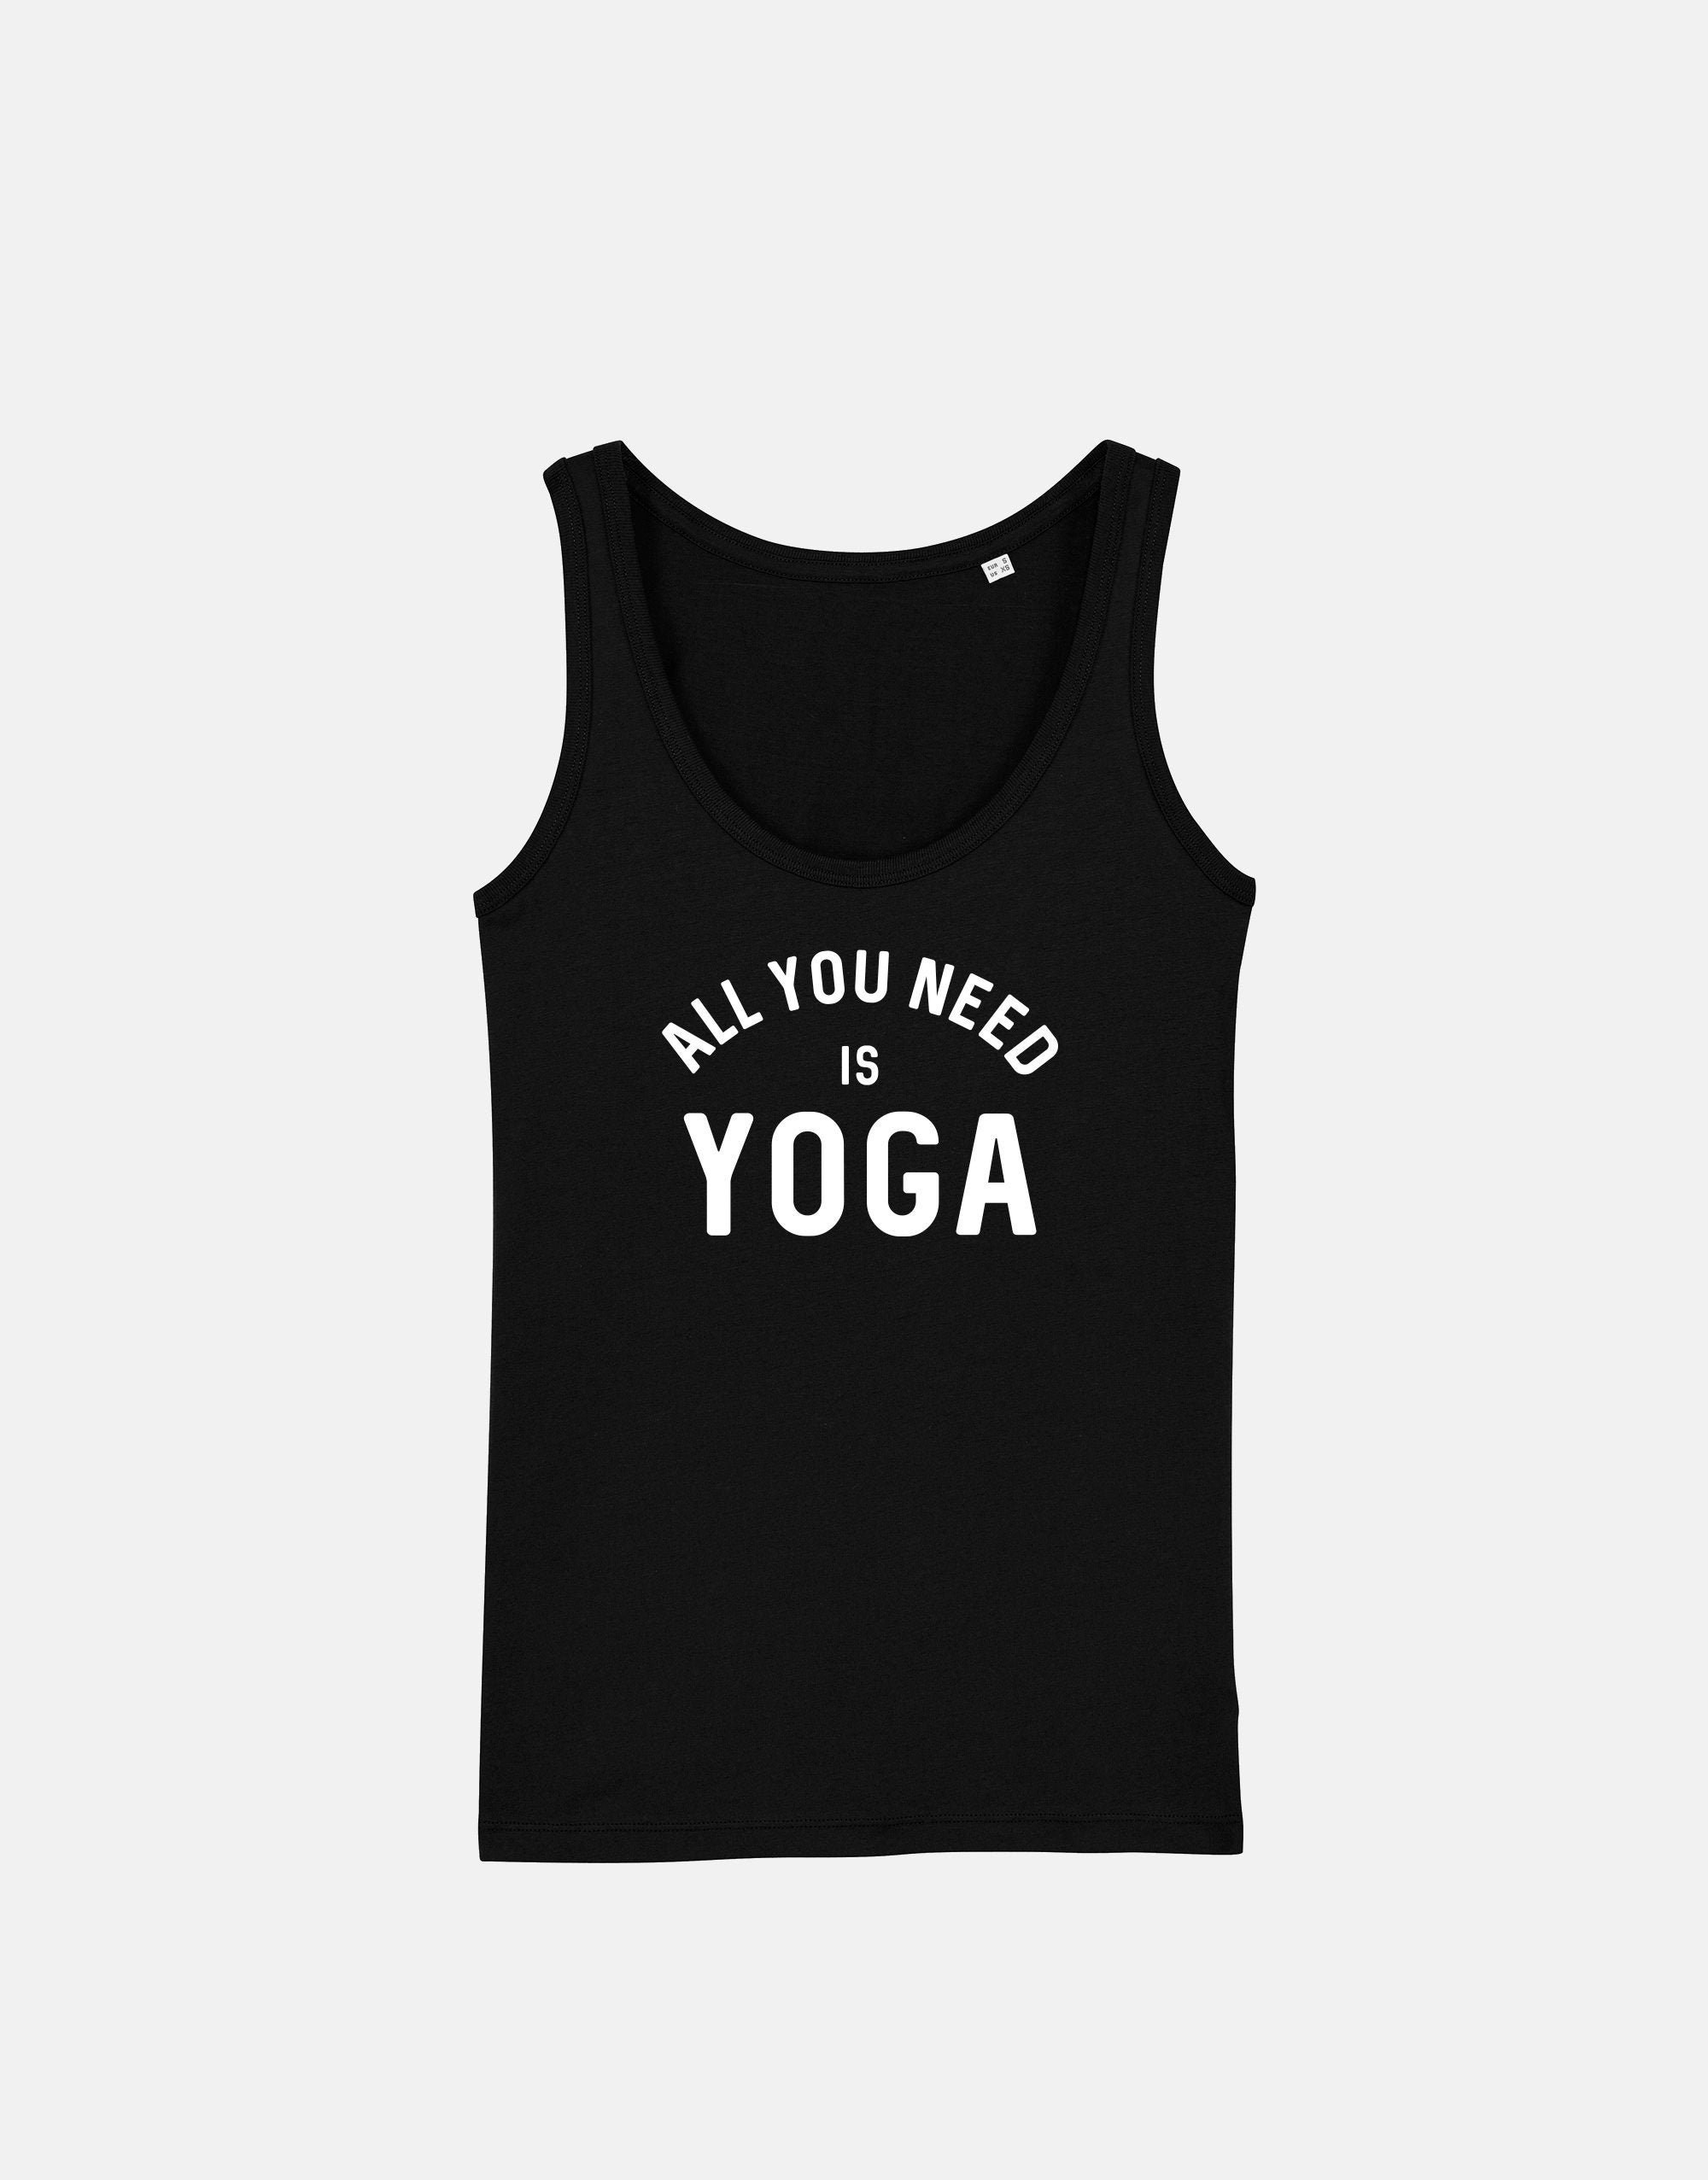 Yoga Tank Top All You Need is Yoga Girls Fitness Workout - Etsy UK